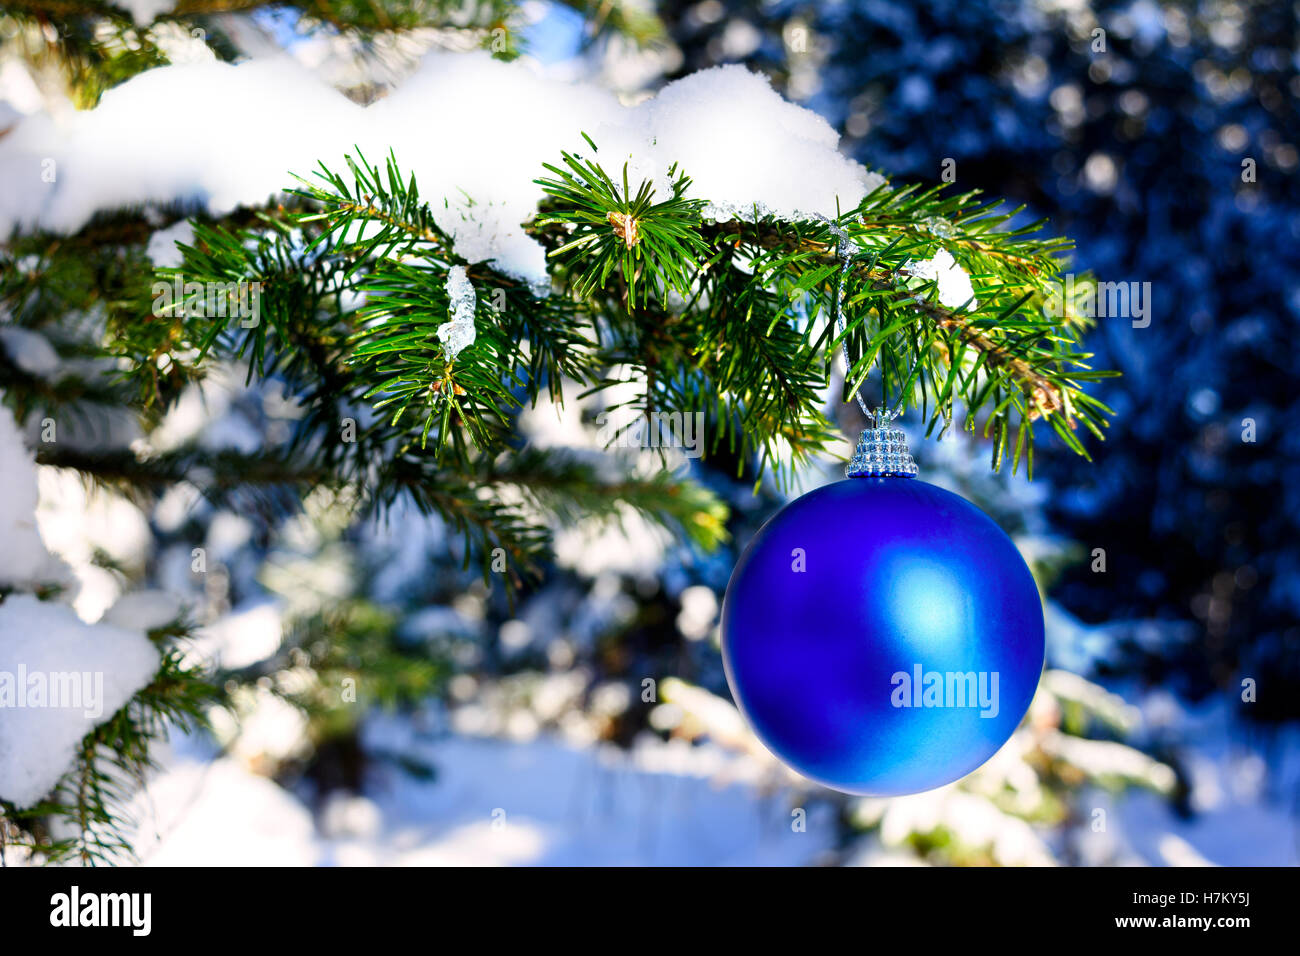 Blue Christmas ornament hanging on forest tree branch. Christmas tree and Christmas decoration. Christmas greeting background. Stock Photo